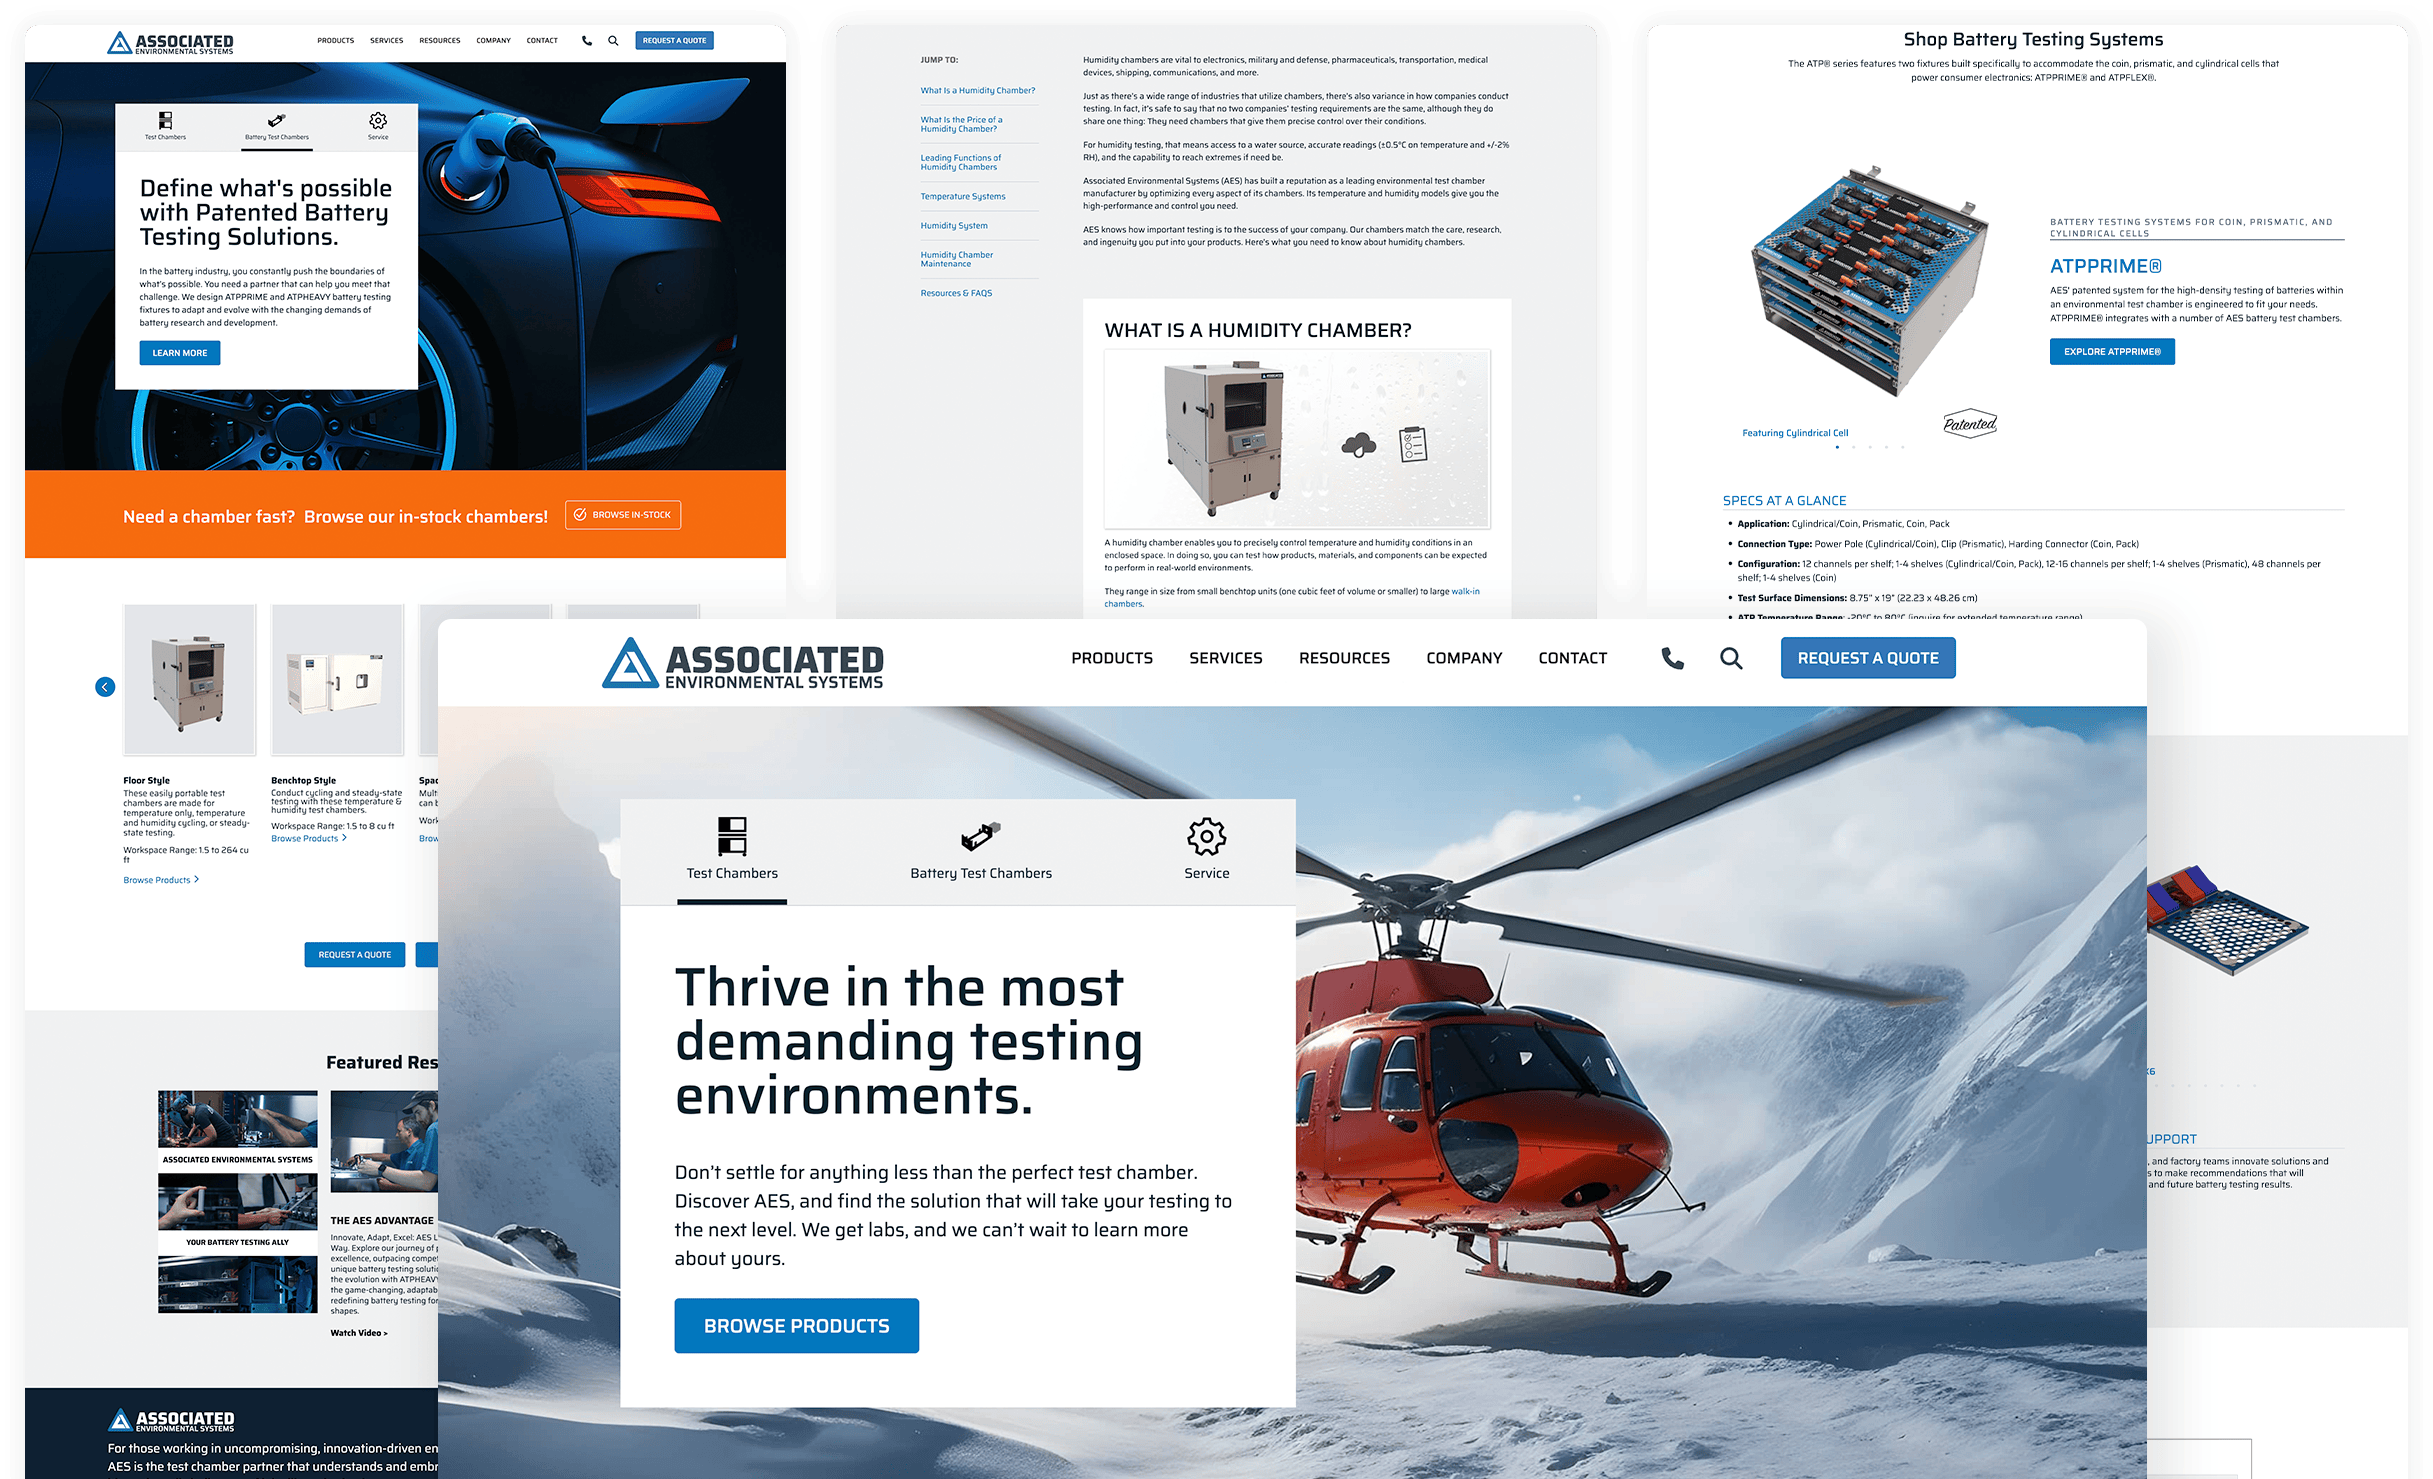 various screenshots of images from Associated Environmental Systems website